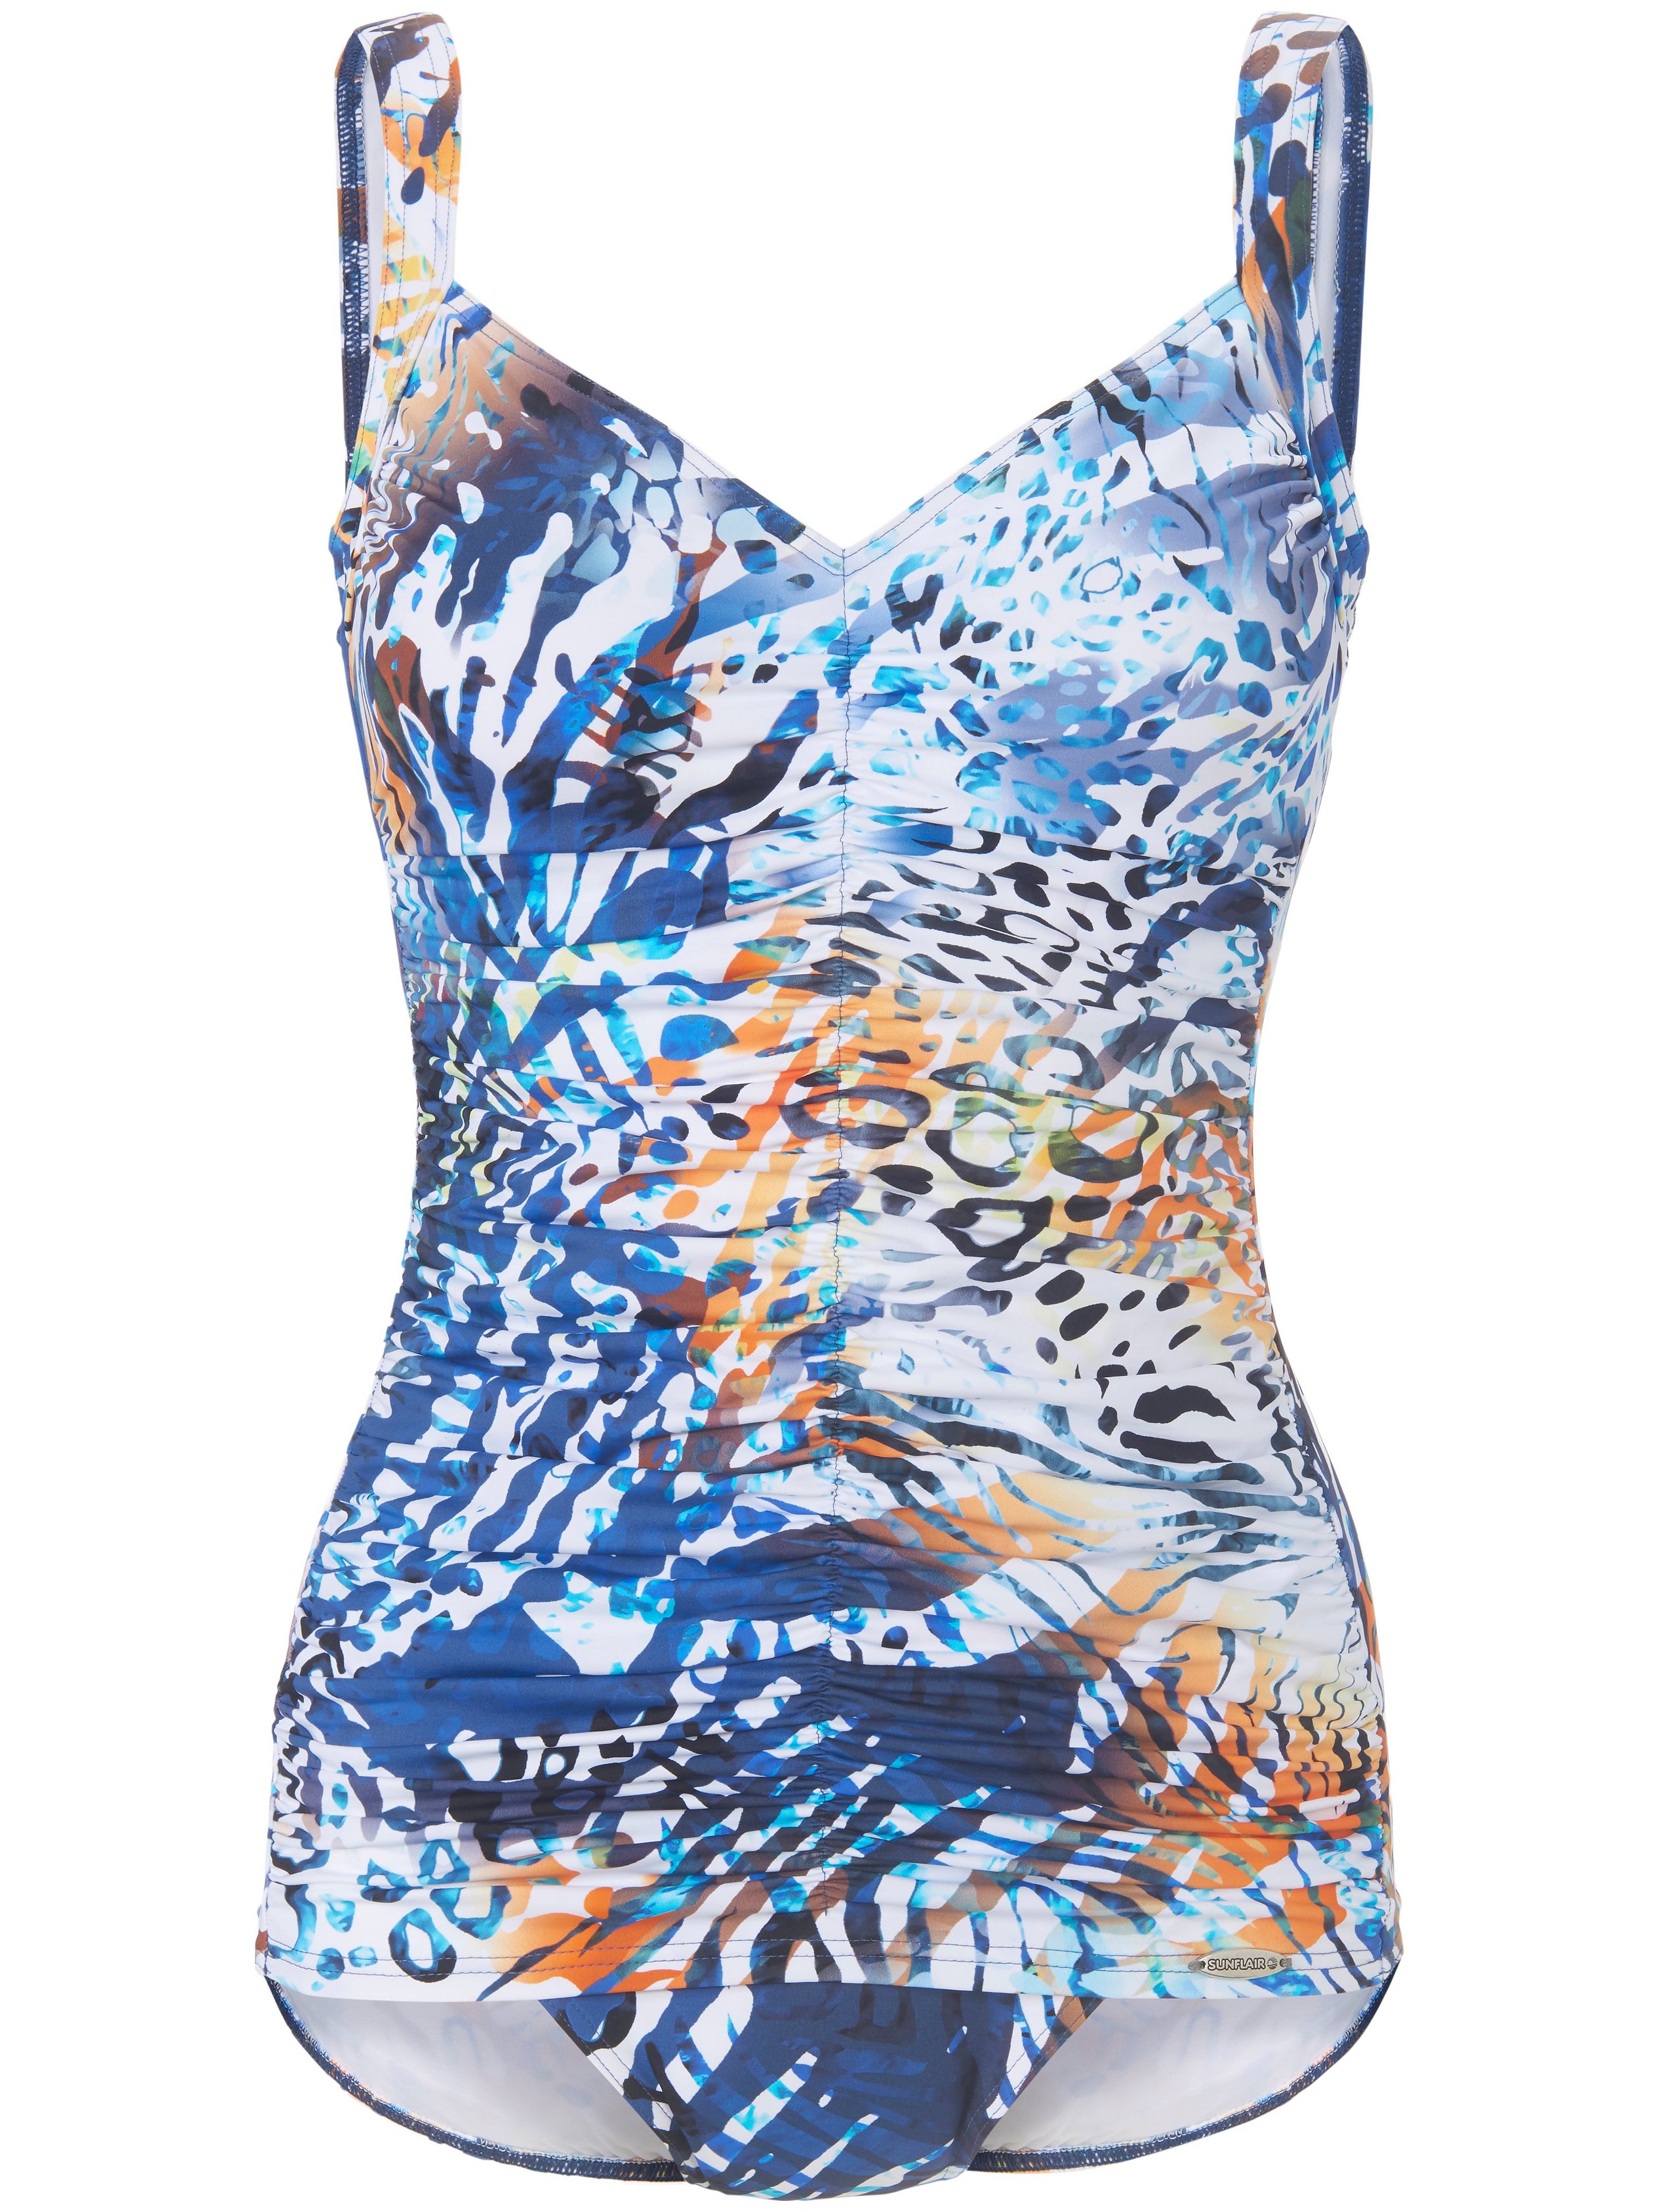 Swimsuit soft cups Sunflair multicoloured